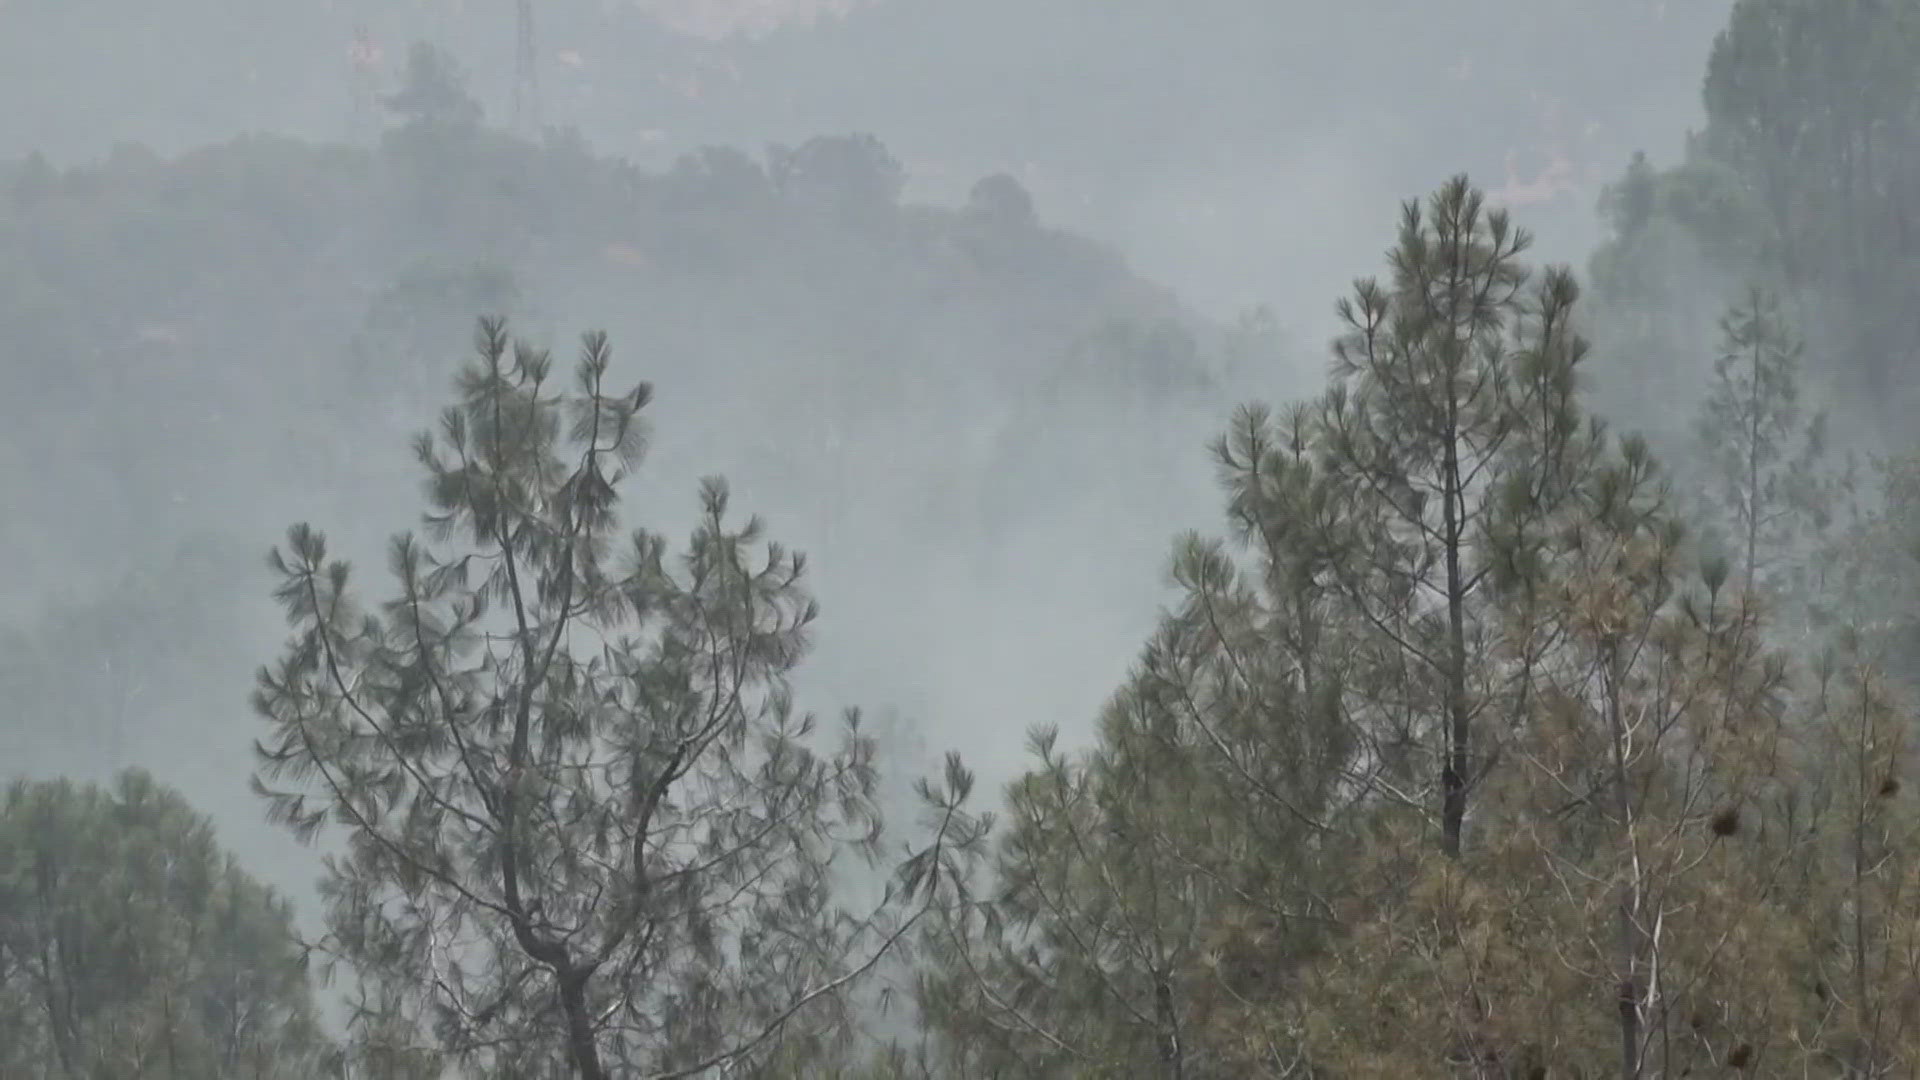 Evacuation orders and warnings are still in effect for parts of Calaveras County as crews battle the Aero Fire.